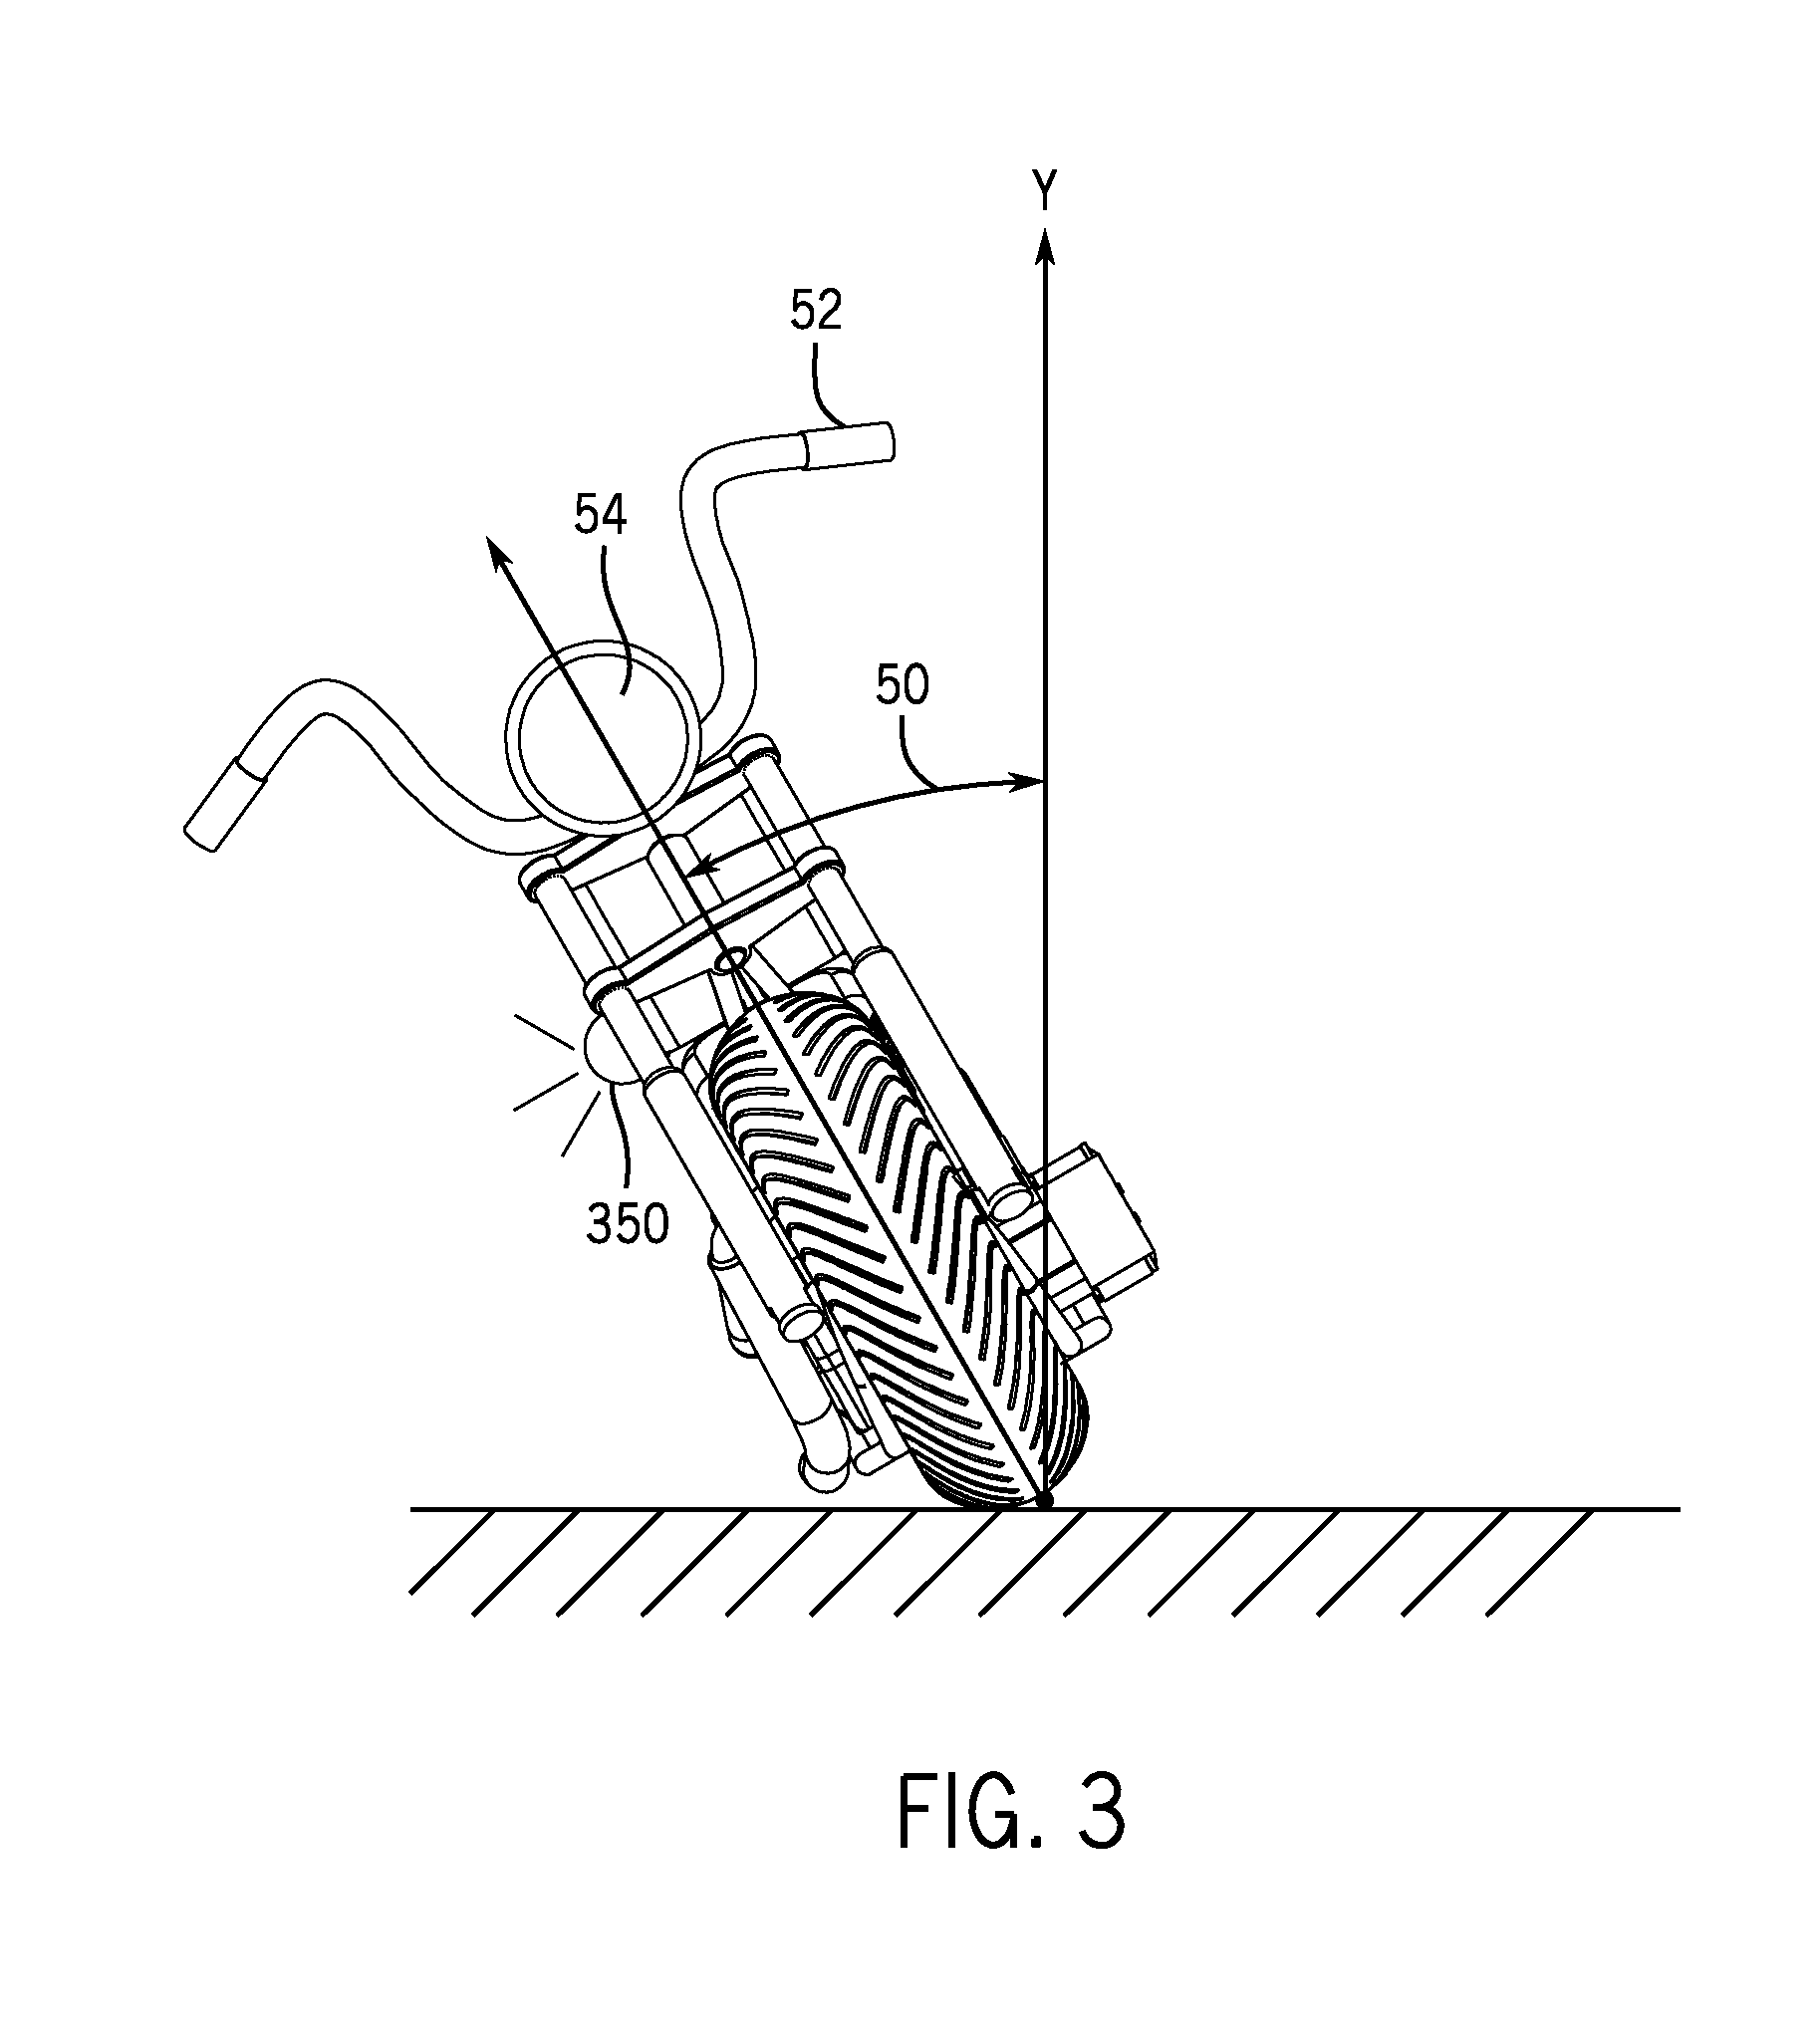 Systems and methods for illumination control and distribution during a vehicle bank